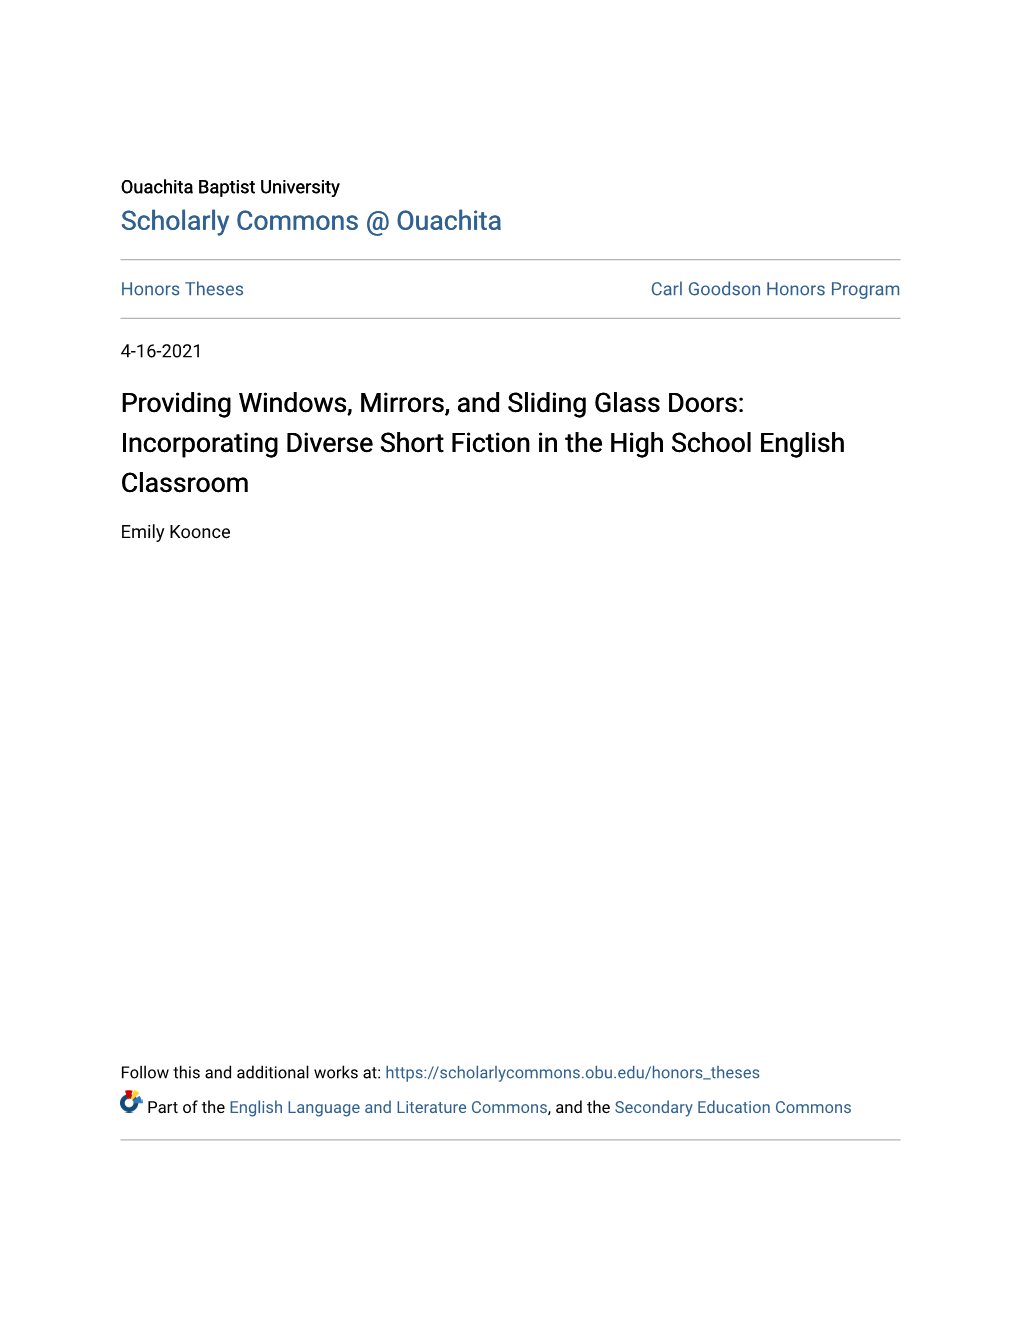 Incorporating Diverse Short Fiction in the High School English Classroom